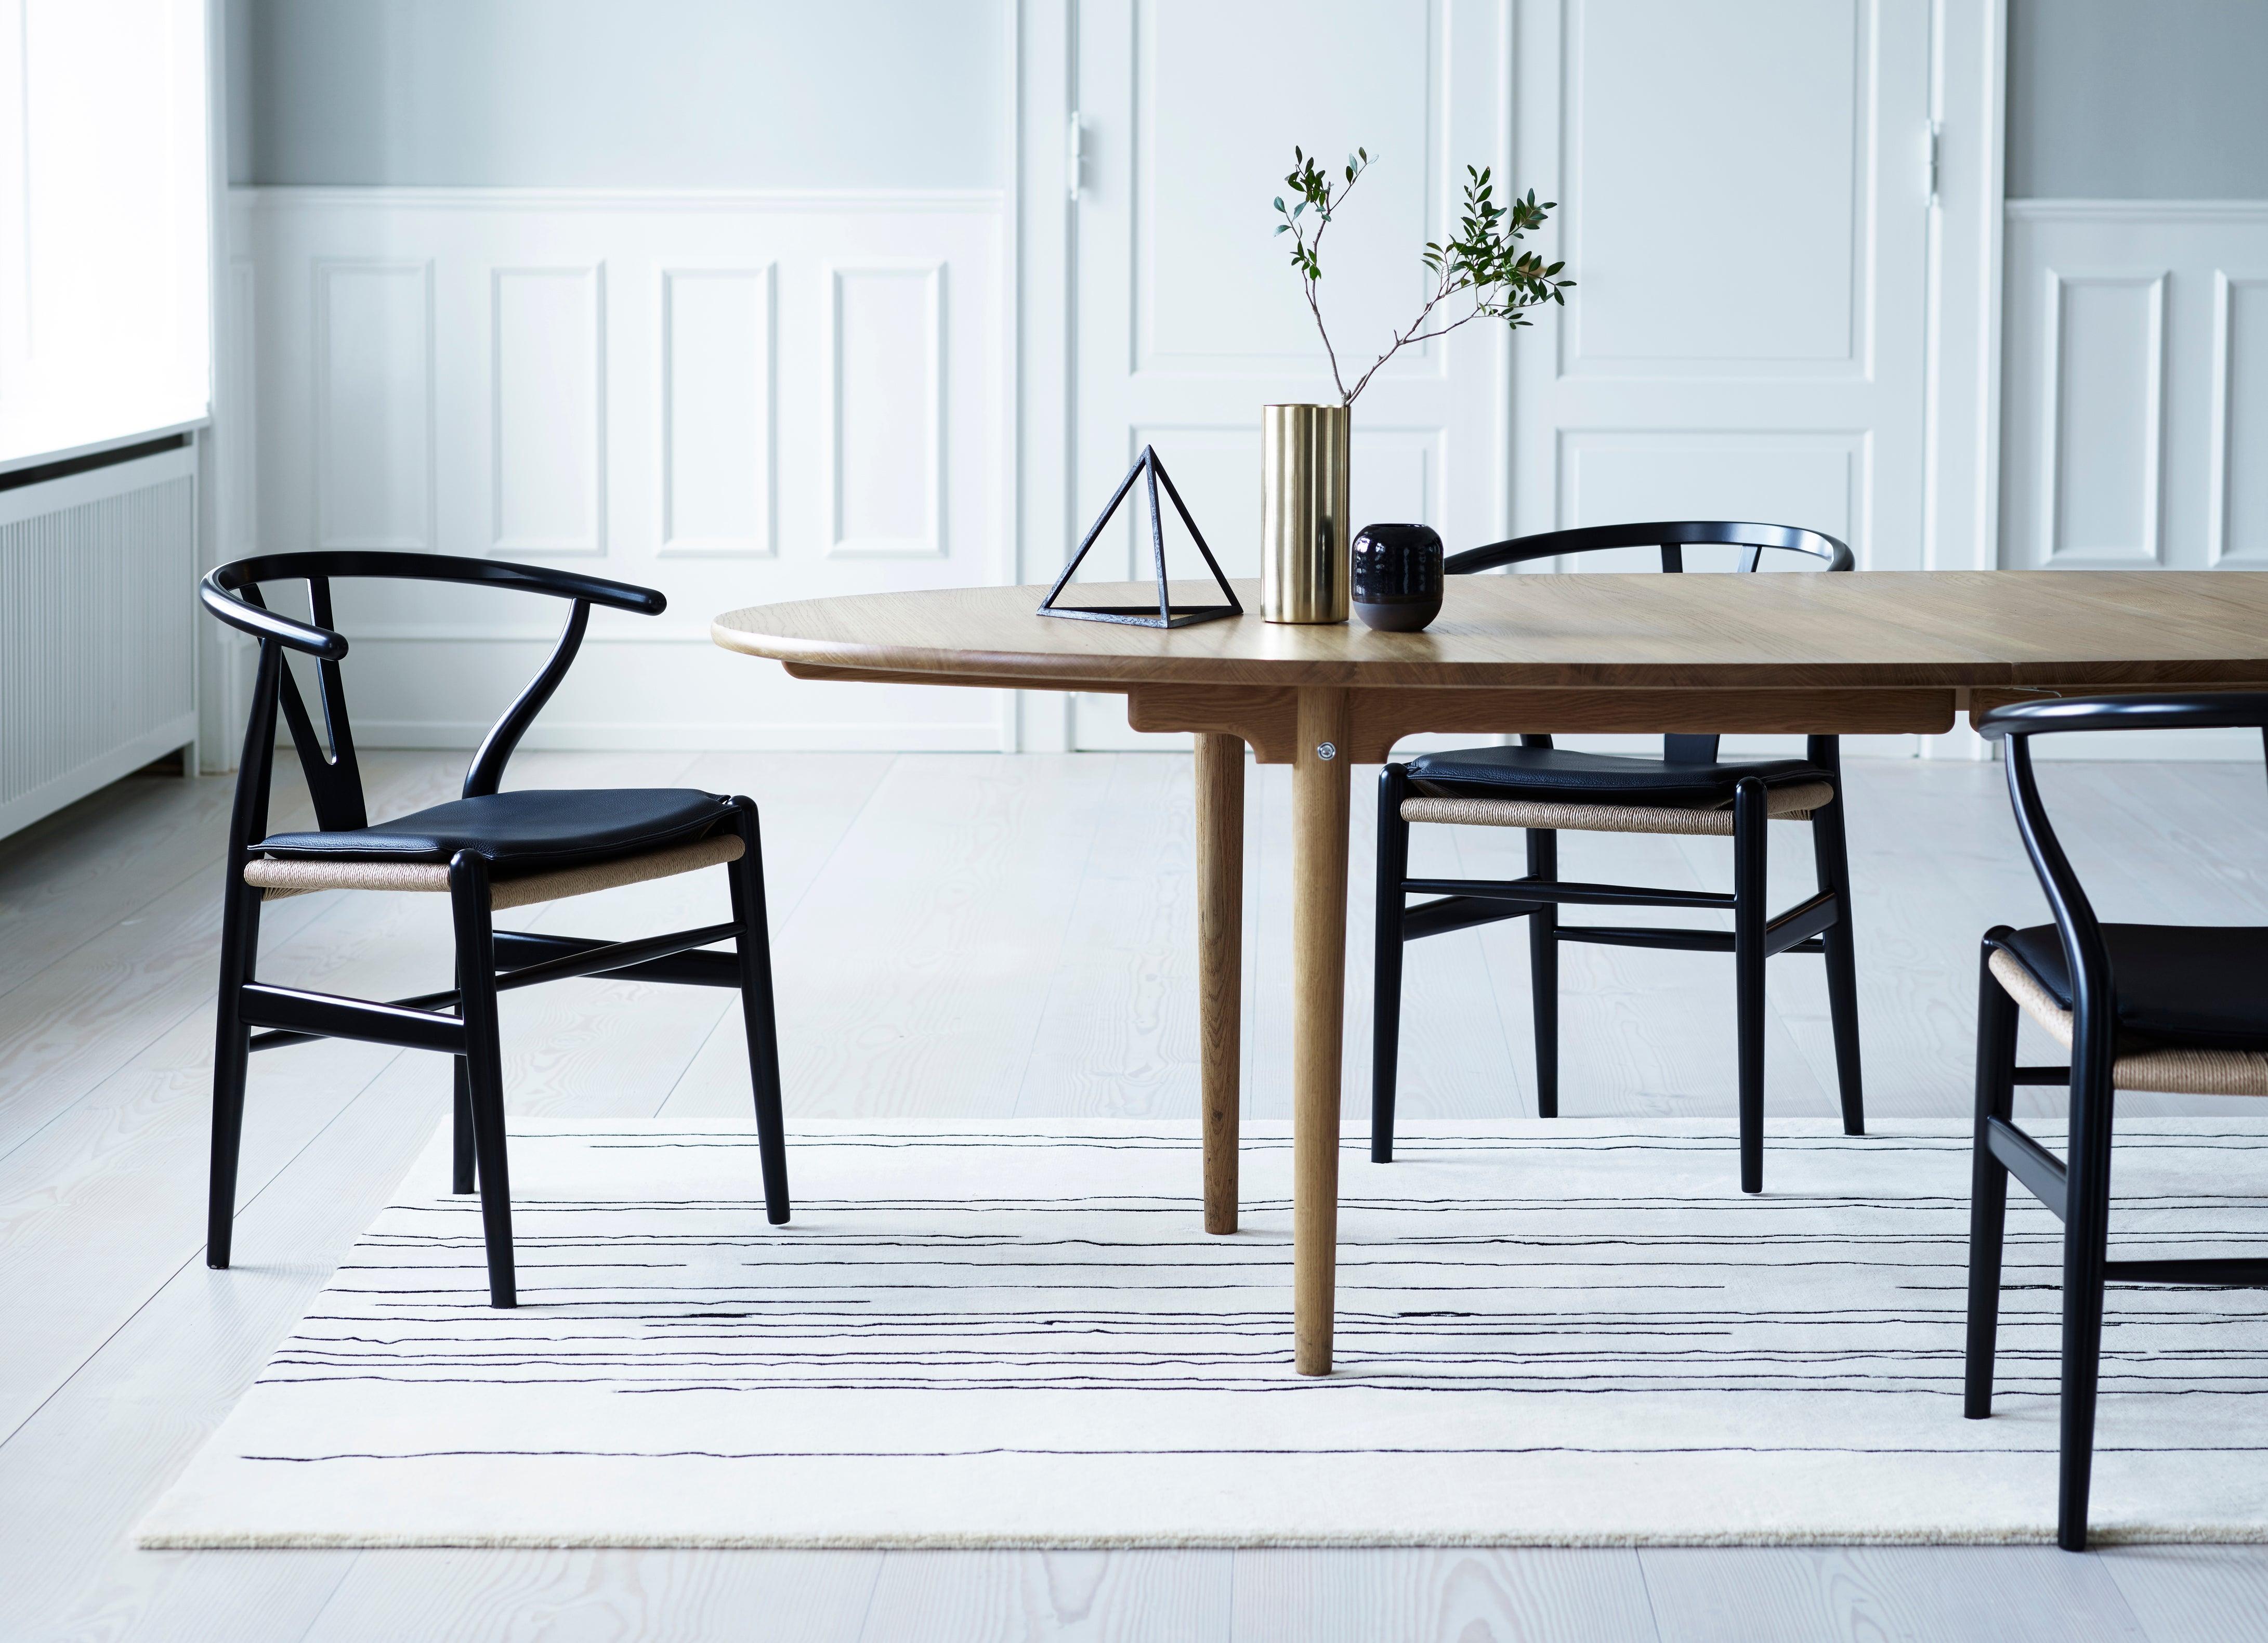 Woven CH24 Wishbone Chair in Walnut Oil with Black Papercord Seat by Hans J. Wegner